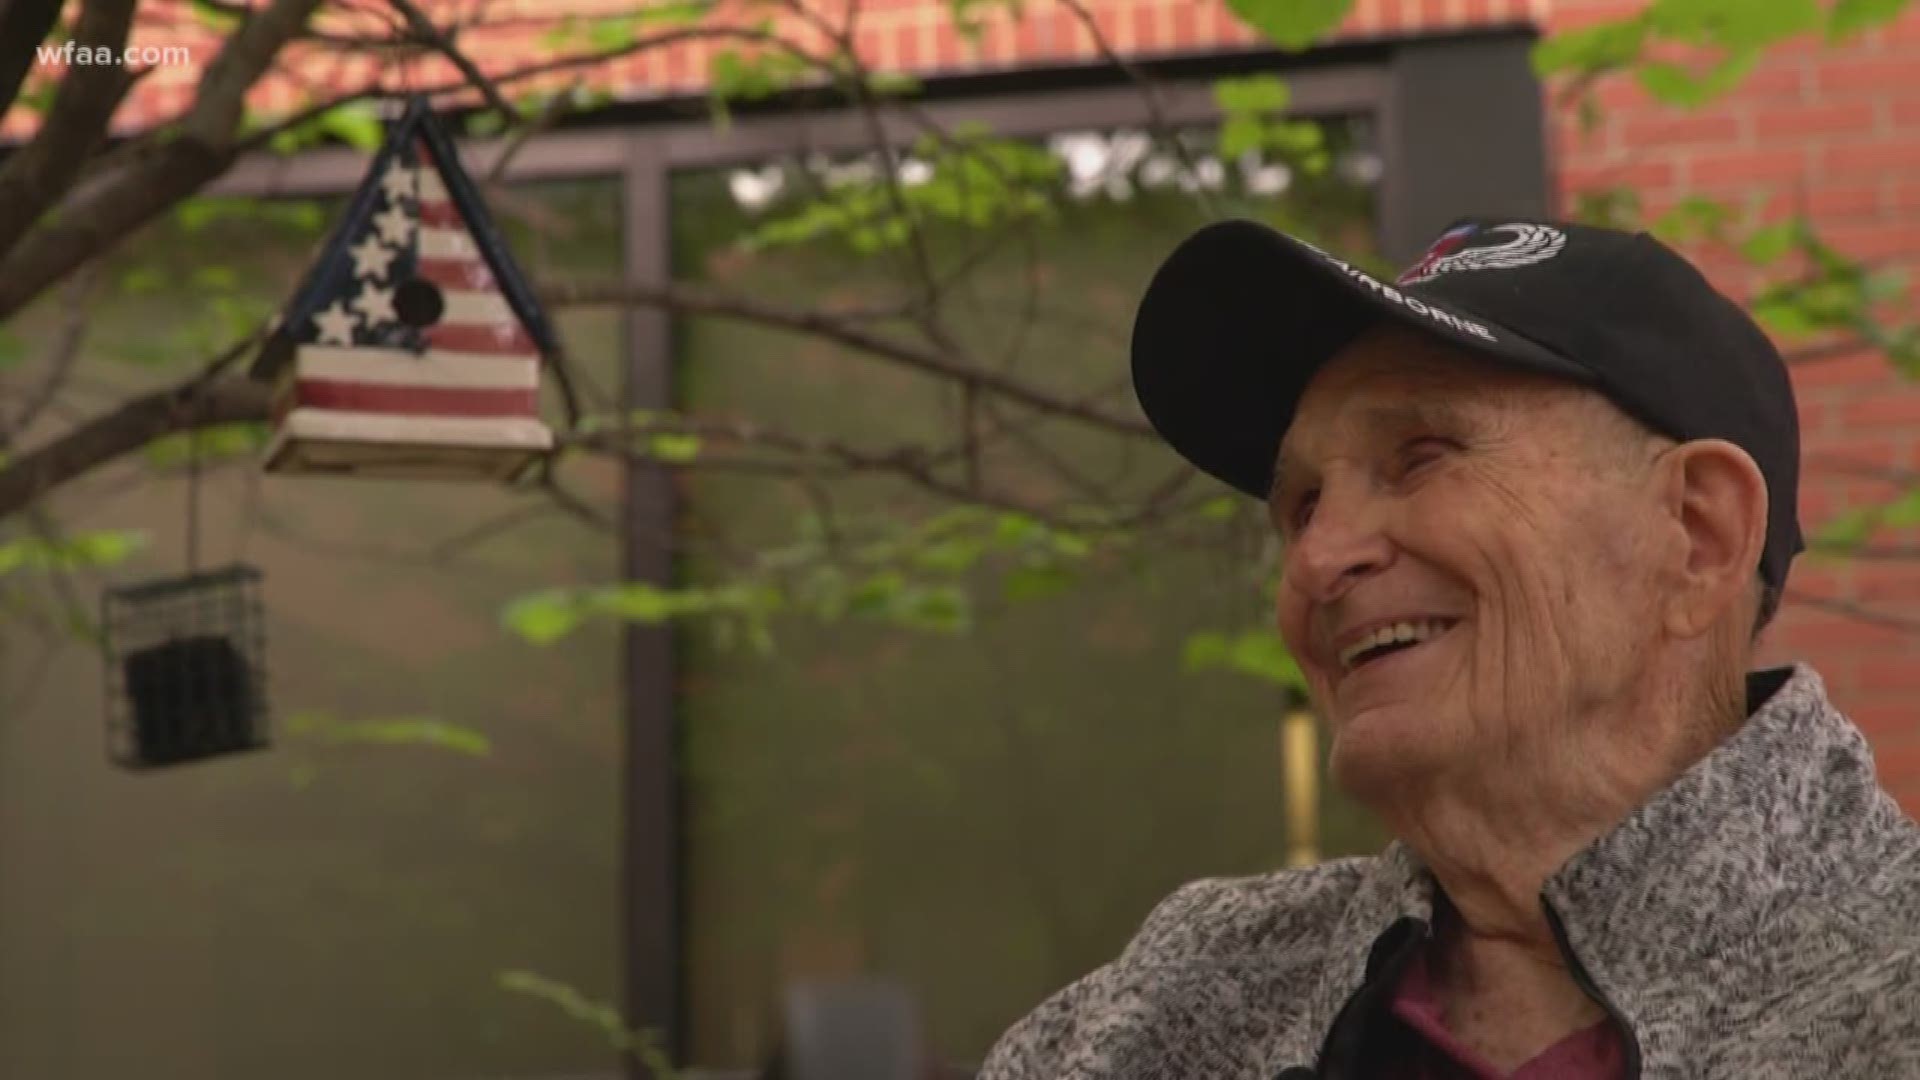 Dallas World War II veteran and the return to D-Day 75 years later